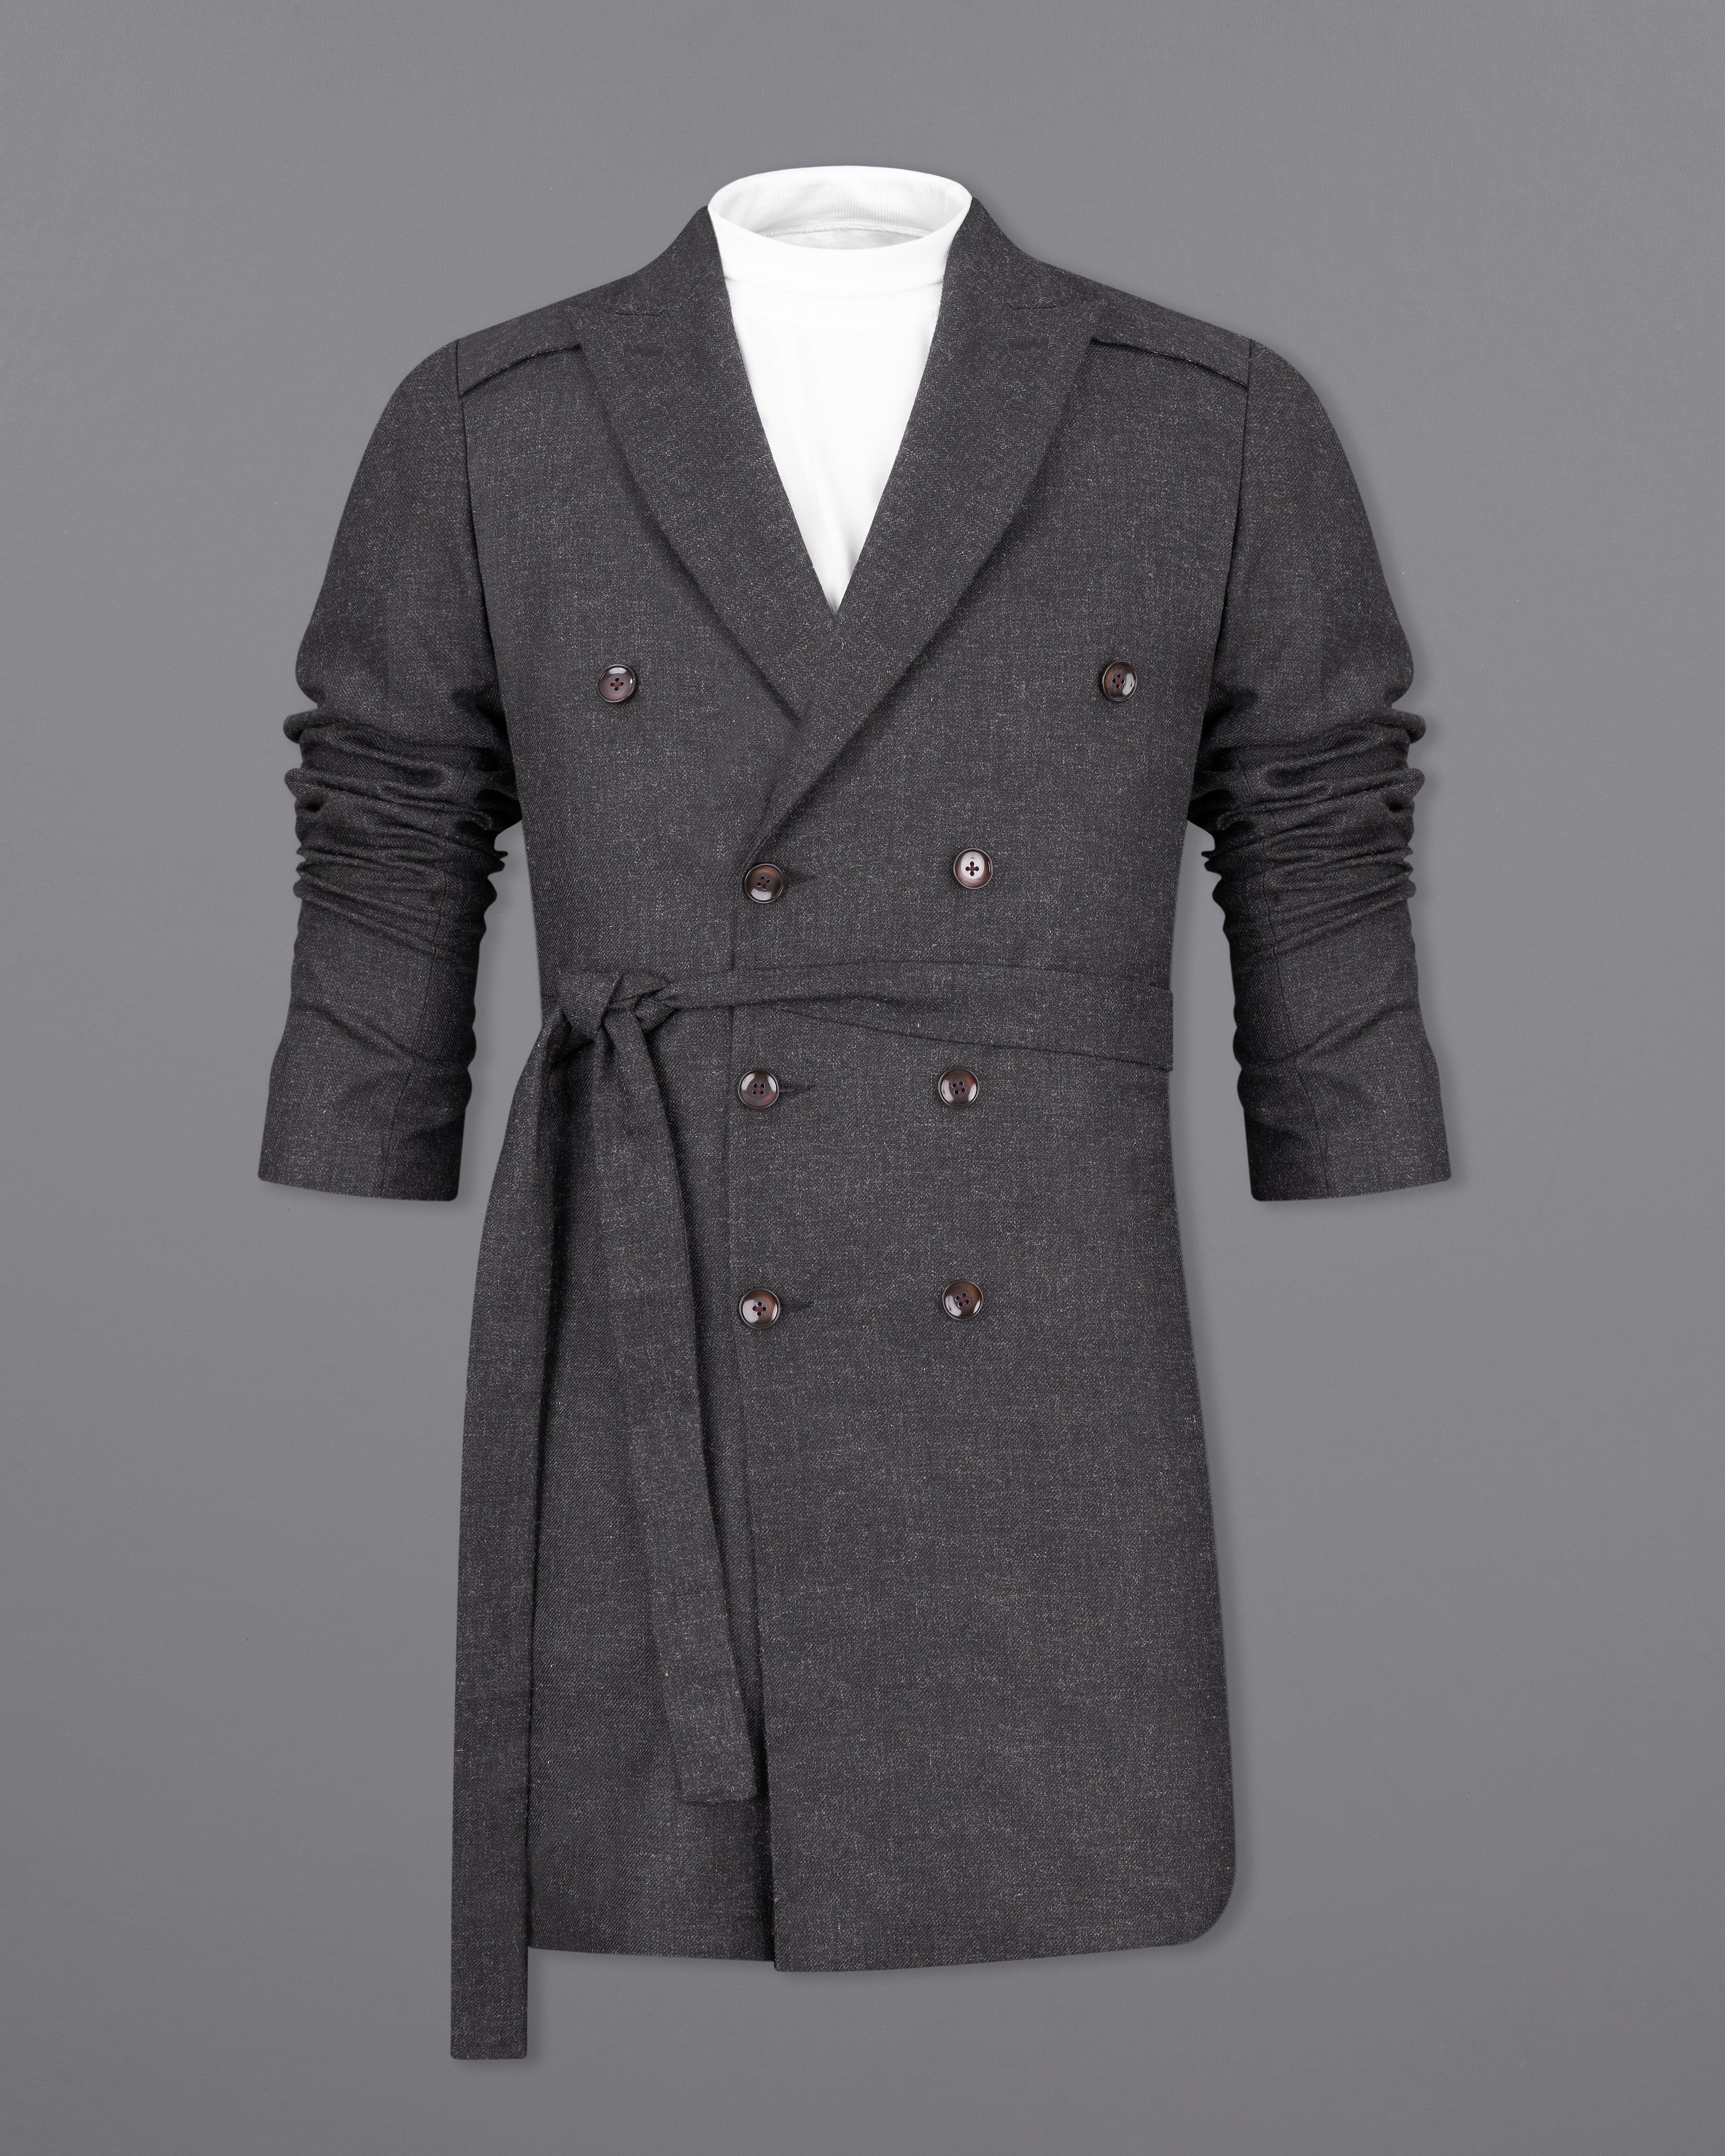 Iridium Gray Wool Rich Double Breasted Trench Coat,TCB2529-DB-D35-36, TCB2529-DB-D35-38, TCB2529-DB-D35-40, TCB2529-DB-D35-42, TCB2529-DB-D35-44, TCB2529-DB-D35-46, TCB2529-DB-D35-48, TCB2529-DB-D35-50, TCB2529-DB-D35-52, TCB2529-DB-D35-54, TCB2529-DB-D35-56, TCB2529-DB-D35-58, TCB2529-DB-D35-60